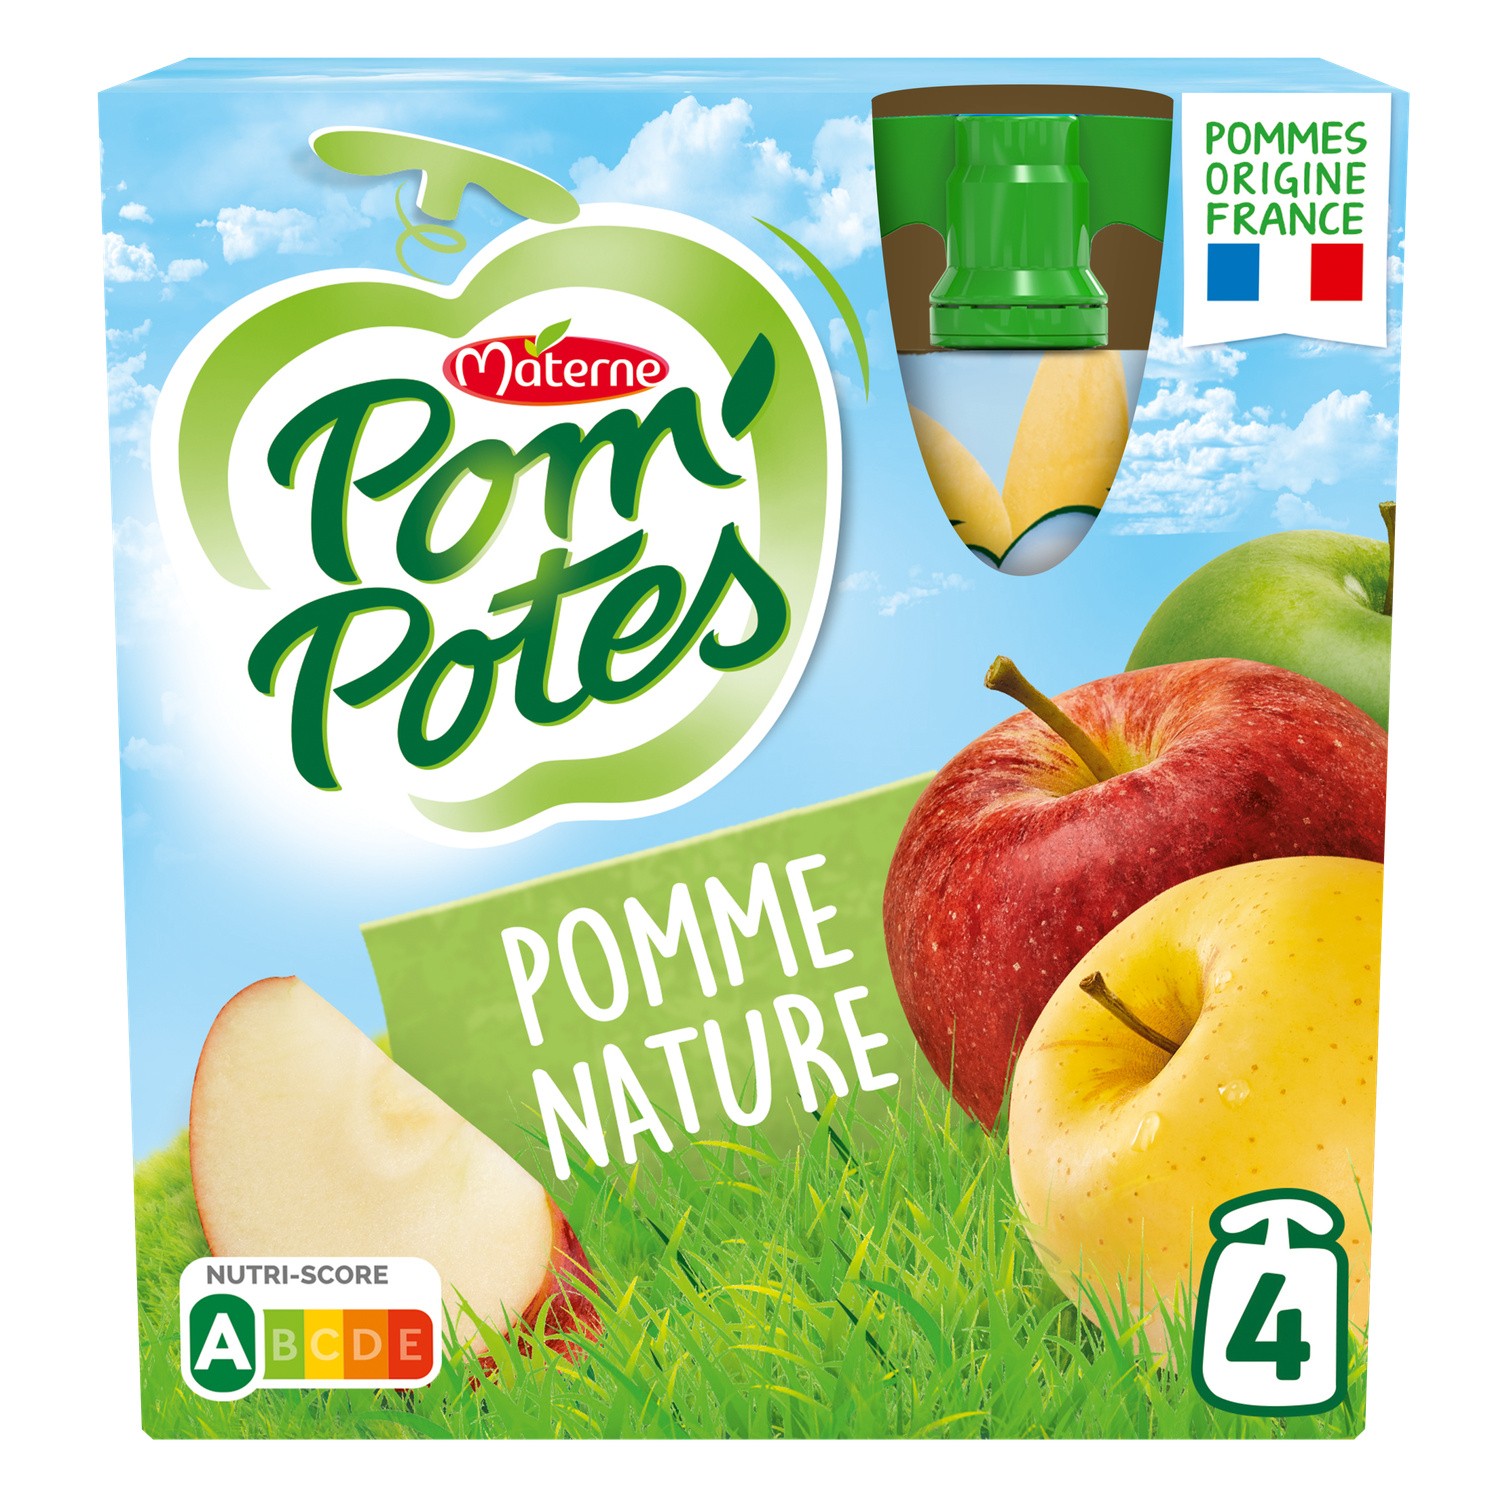 At vise grube Forretningsmand Apple Pom'Potes Materne - Buy Online - My French Grocery